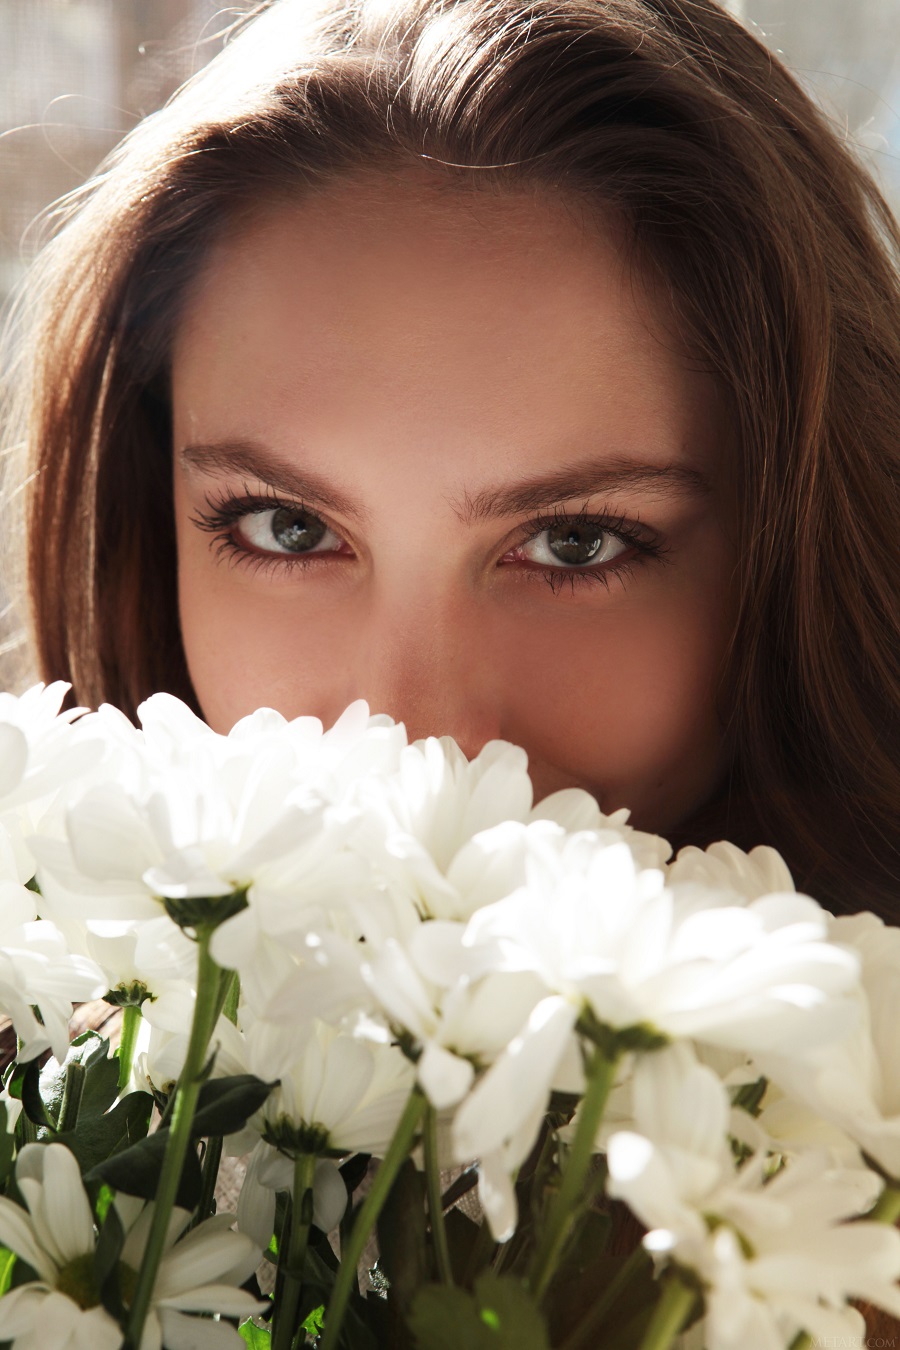 Women Model Brunette Flowers Closeup Looking At Viewer Covering Mouth 900x1350